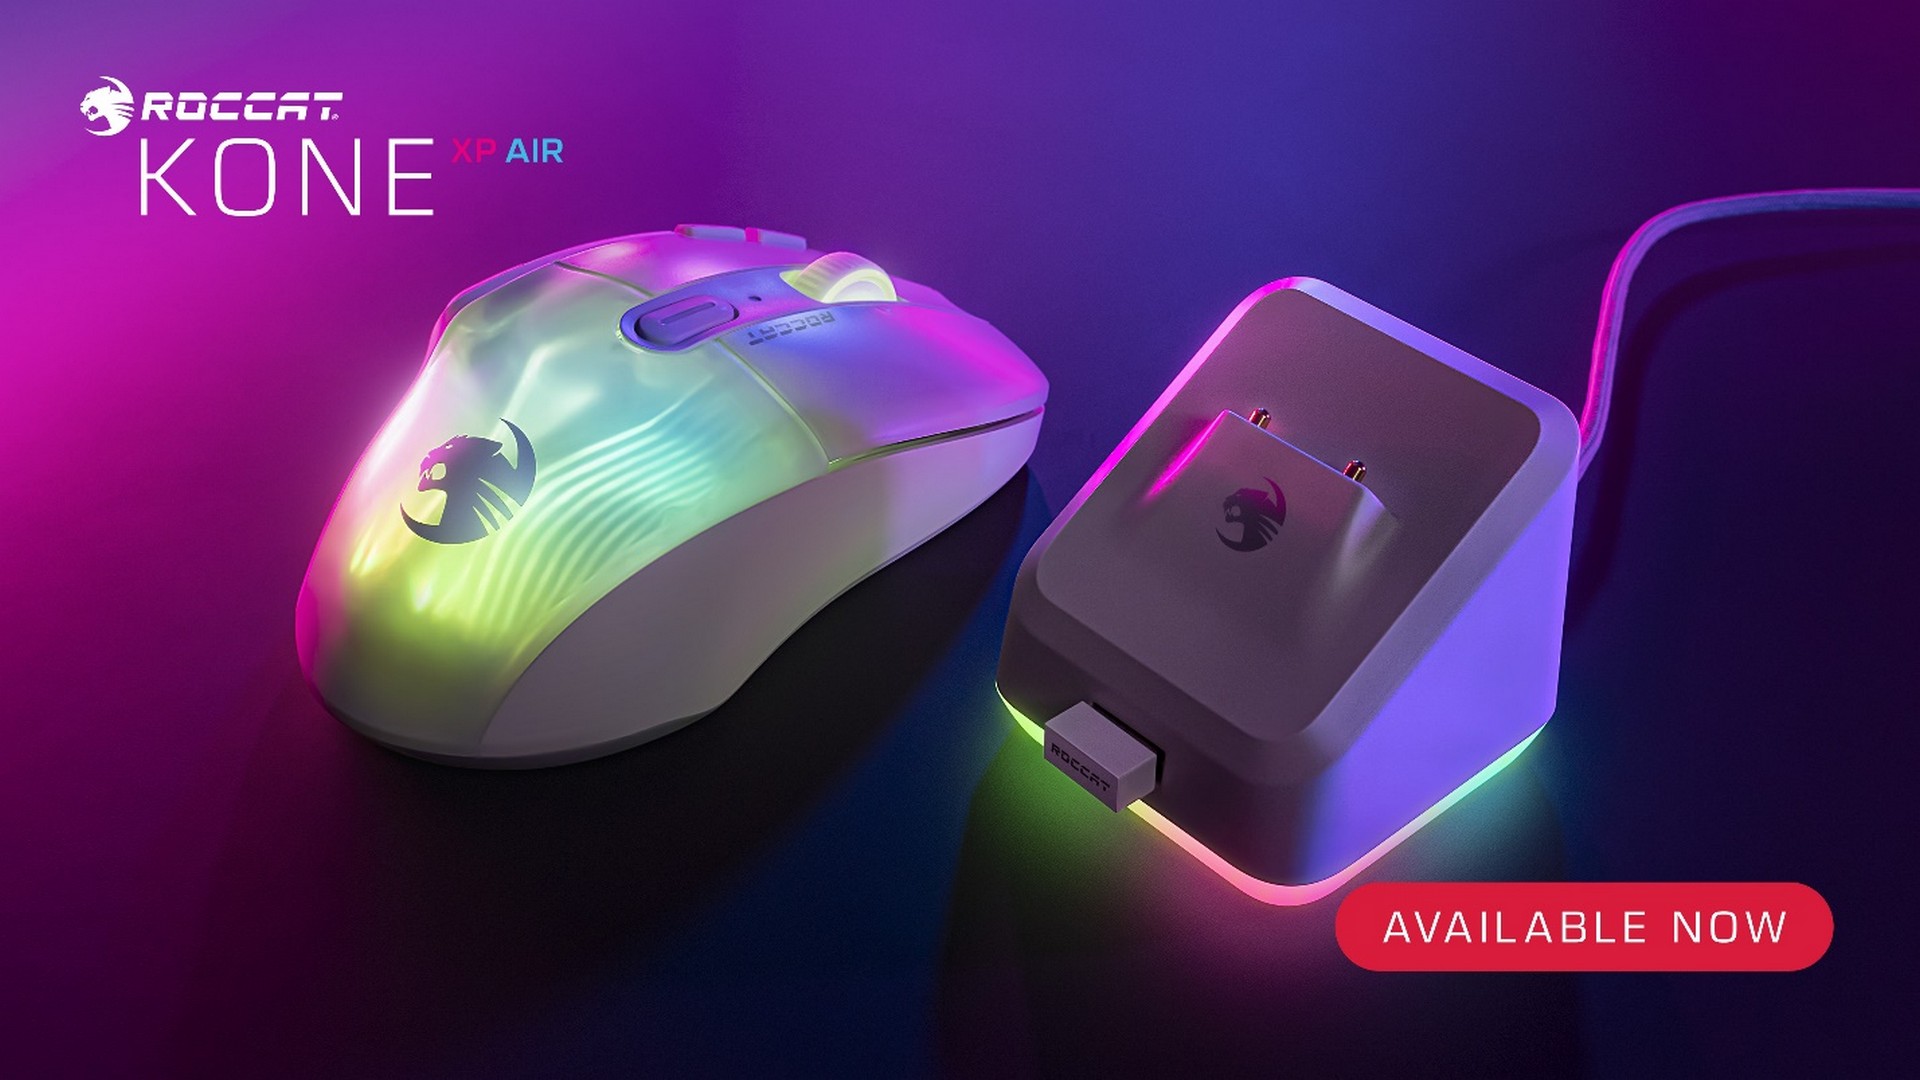 ROCCAT’s New KONE XP AIR Wireless Customisable RGB Gaming Mouse Is Out Now